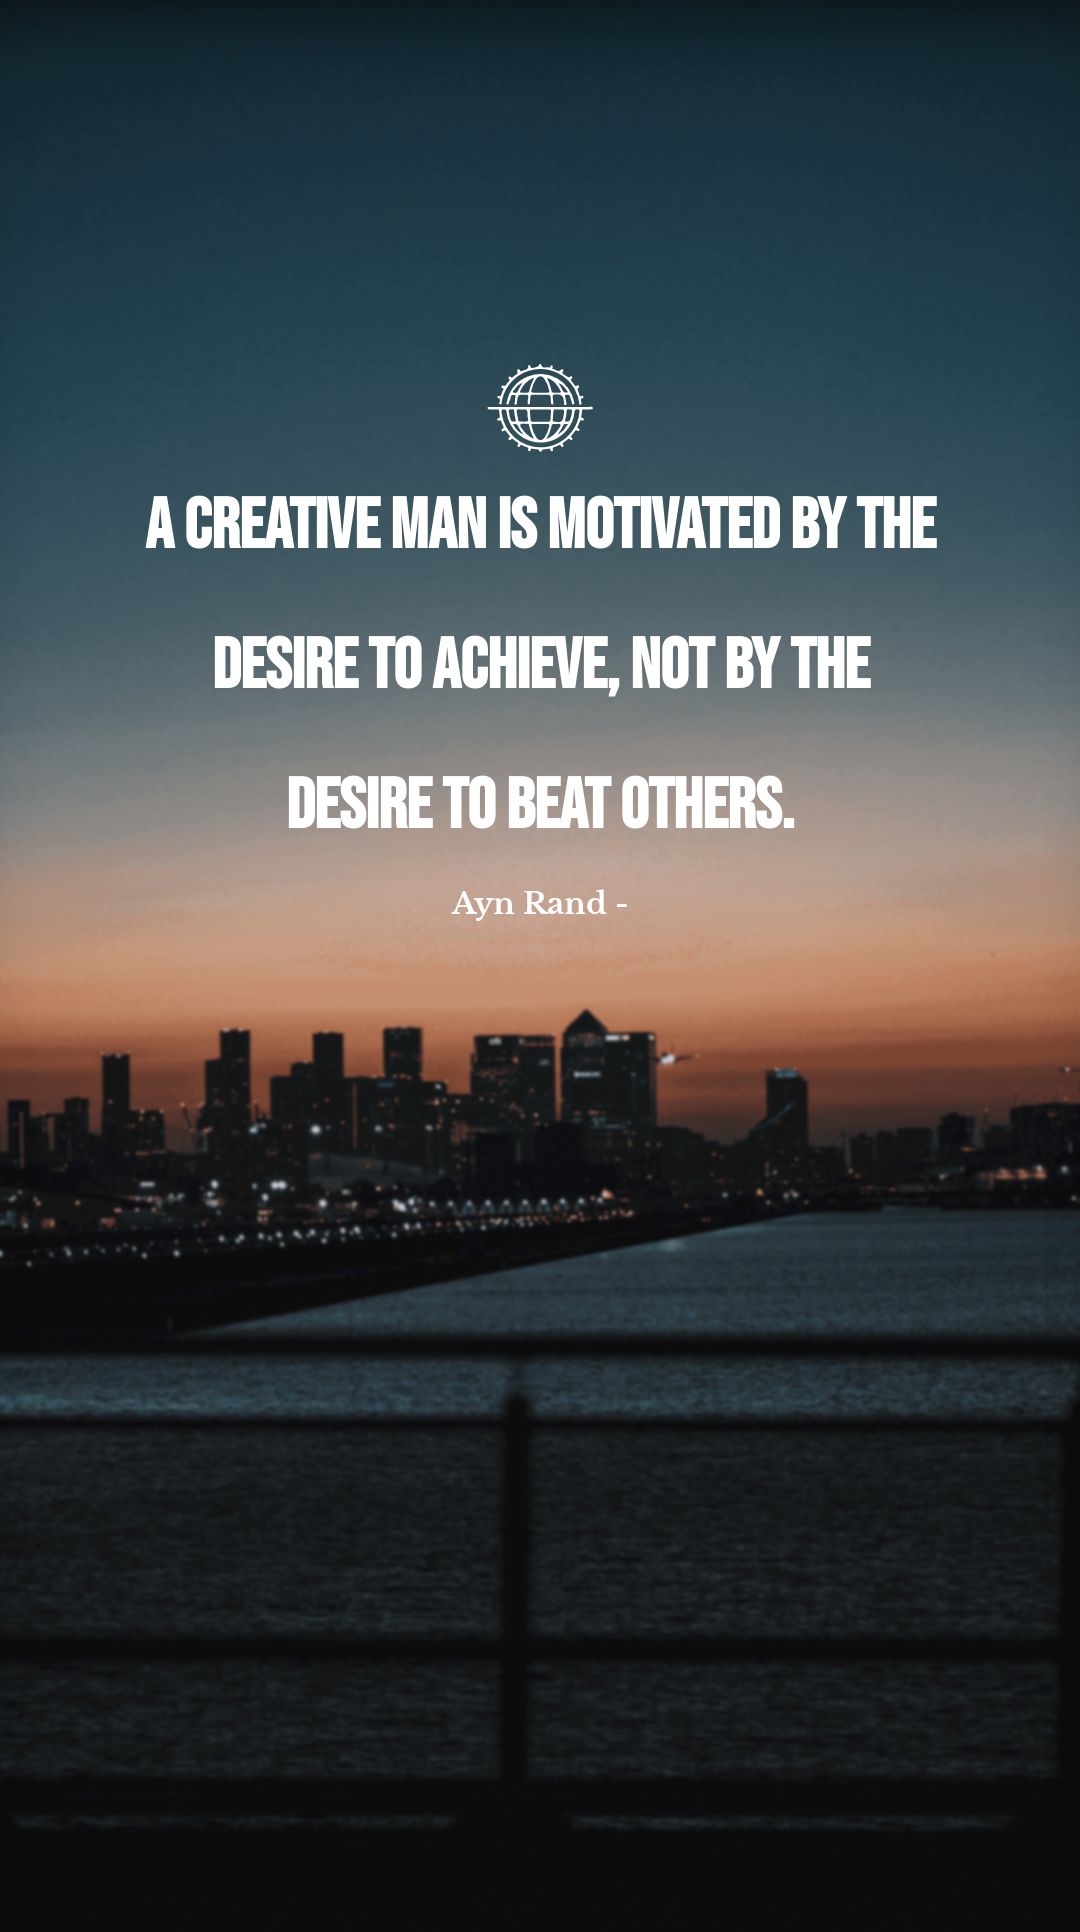 Ayn Rand - A creative man is motivated by the desire to achieve, not by the desire to beat others.